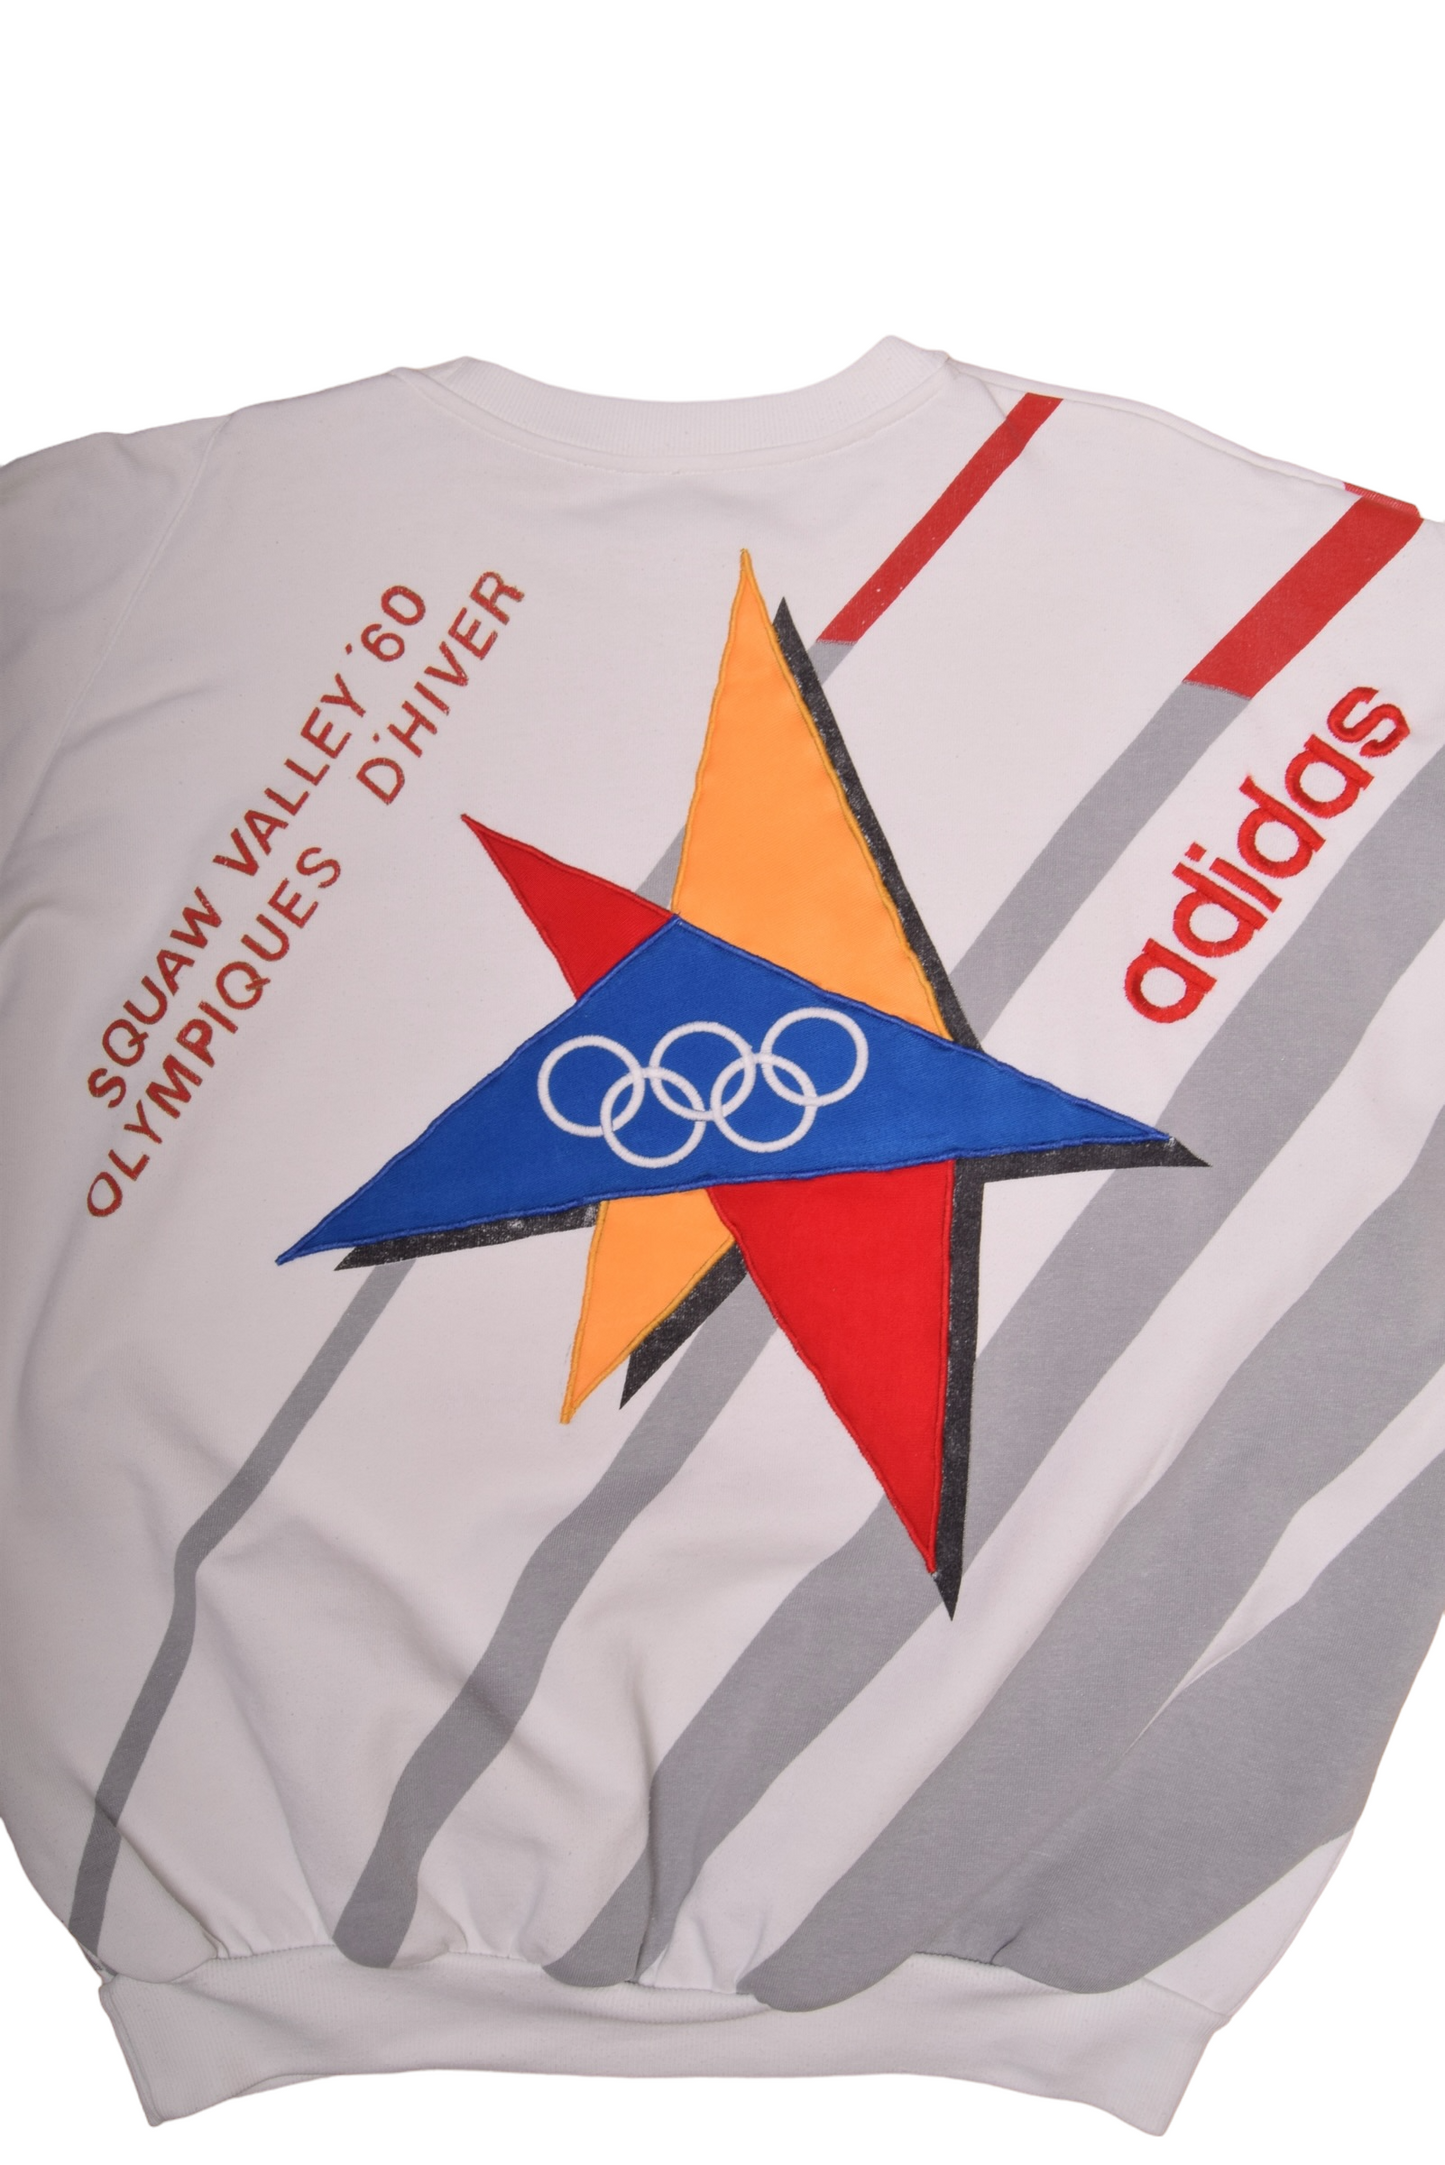 Vintage Adidas Take Off Sweatshirt Crew Neck 2ND Olympic Winter Games St Moritz 11 - 19th Feb. 1928 Squaw Valley '60 Olympiques D'Hiver Made in Taiwan Size L-XL White Red Green Blue Yellow